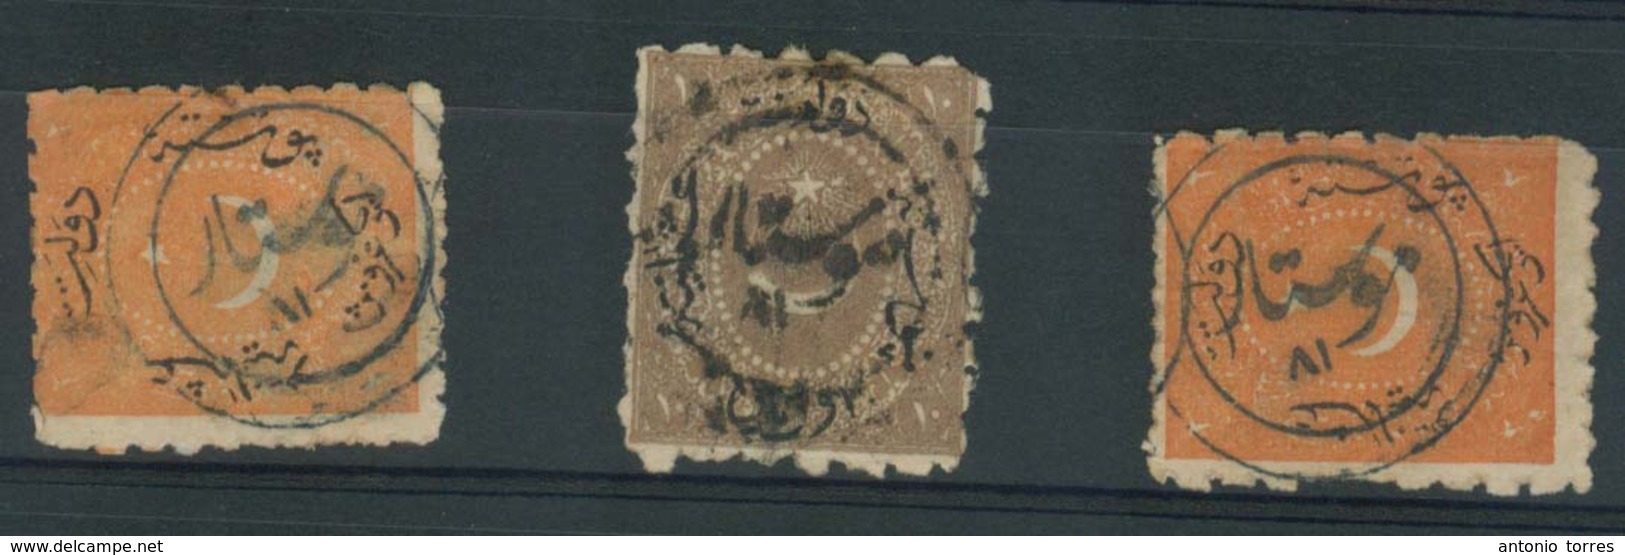 BOSNIA. C.1878. Turkish Post Mostar. 3 Diff Stamps Blue + Black Cancels On The Nose (xx). Fiine Group. - Bosnia And Herzegovina